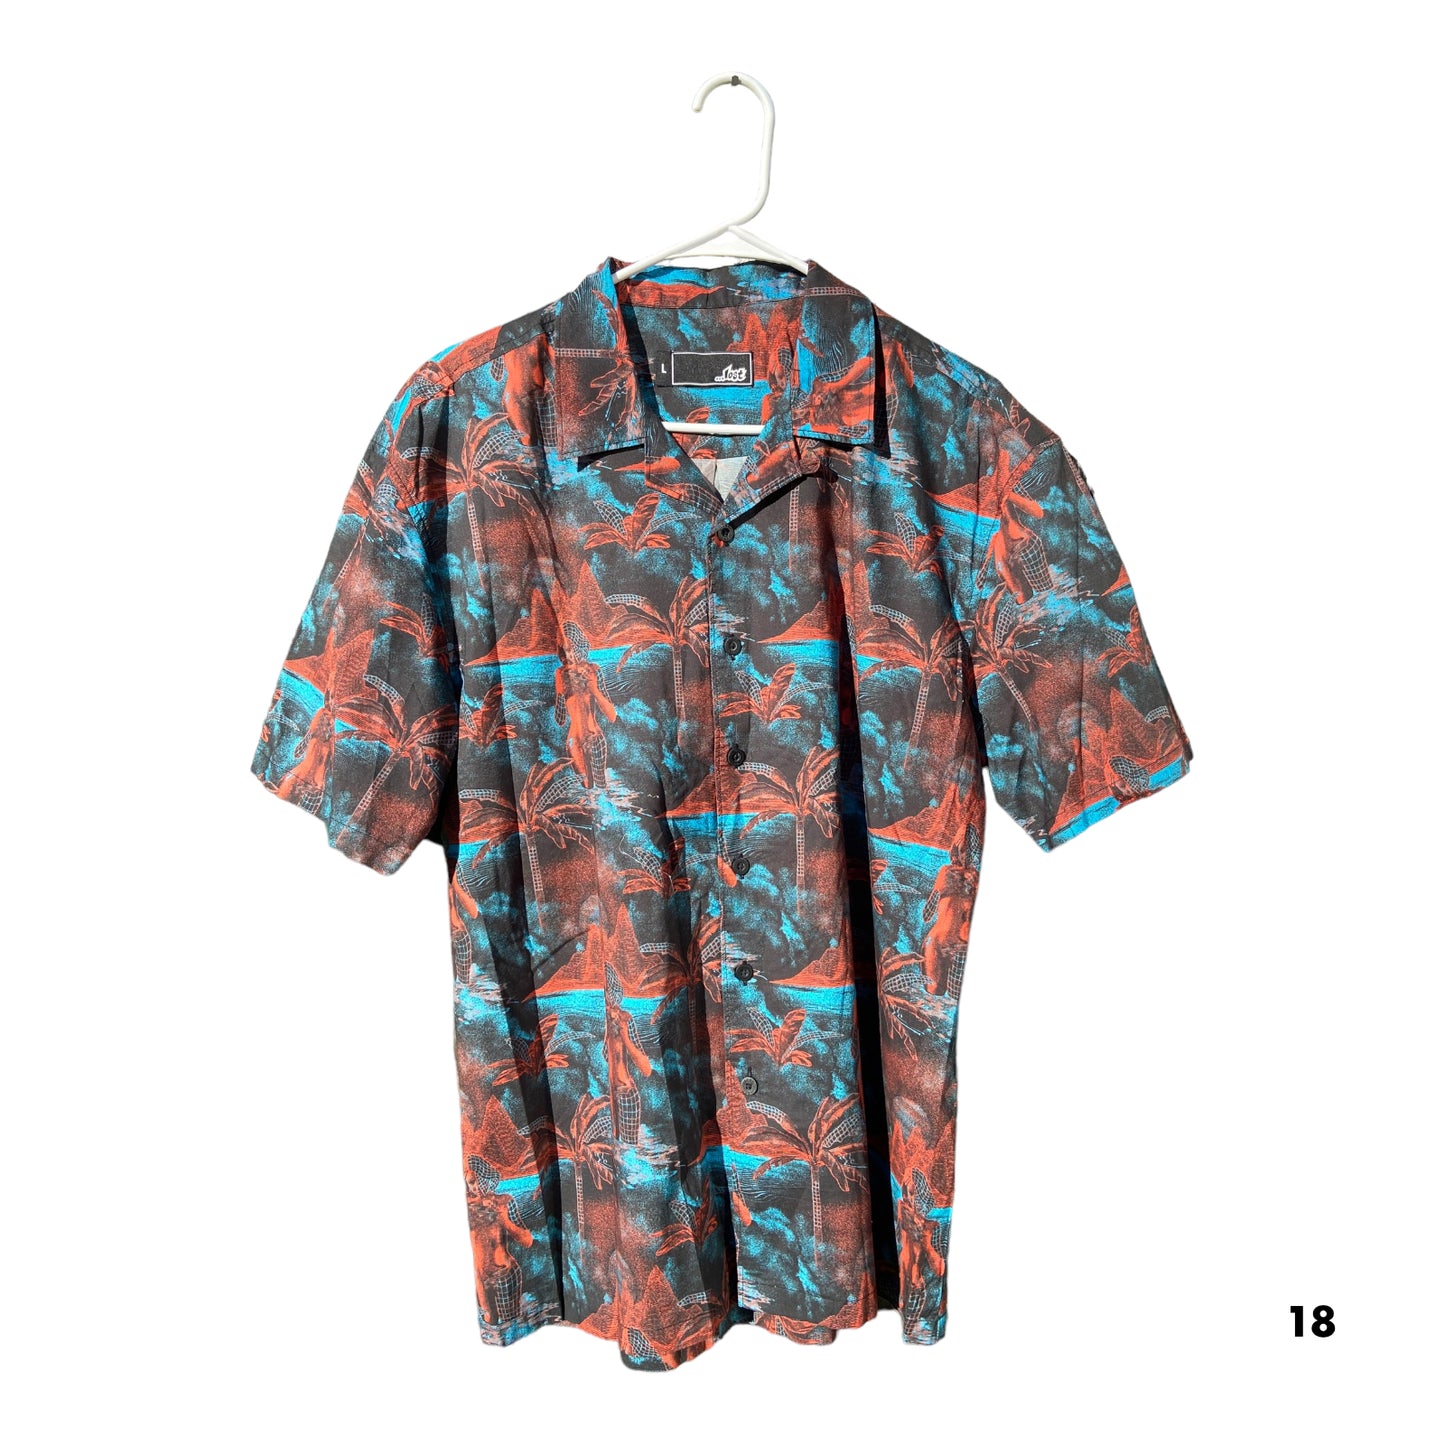 LOST New Mens Large Button-ups Dead Stock FREE SHIPPING